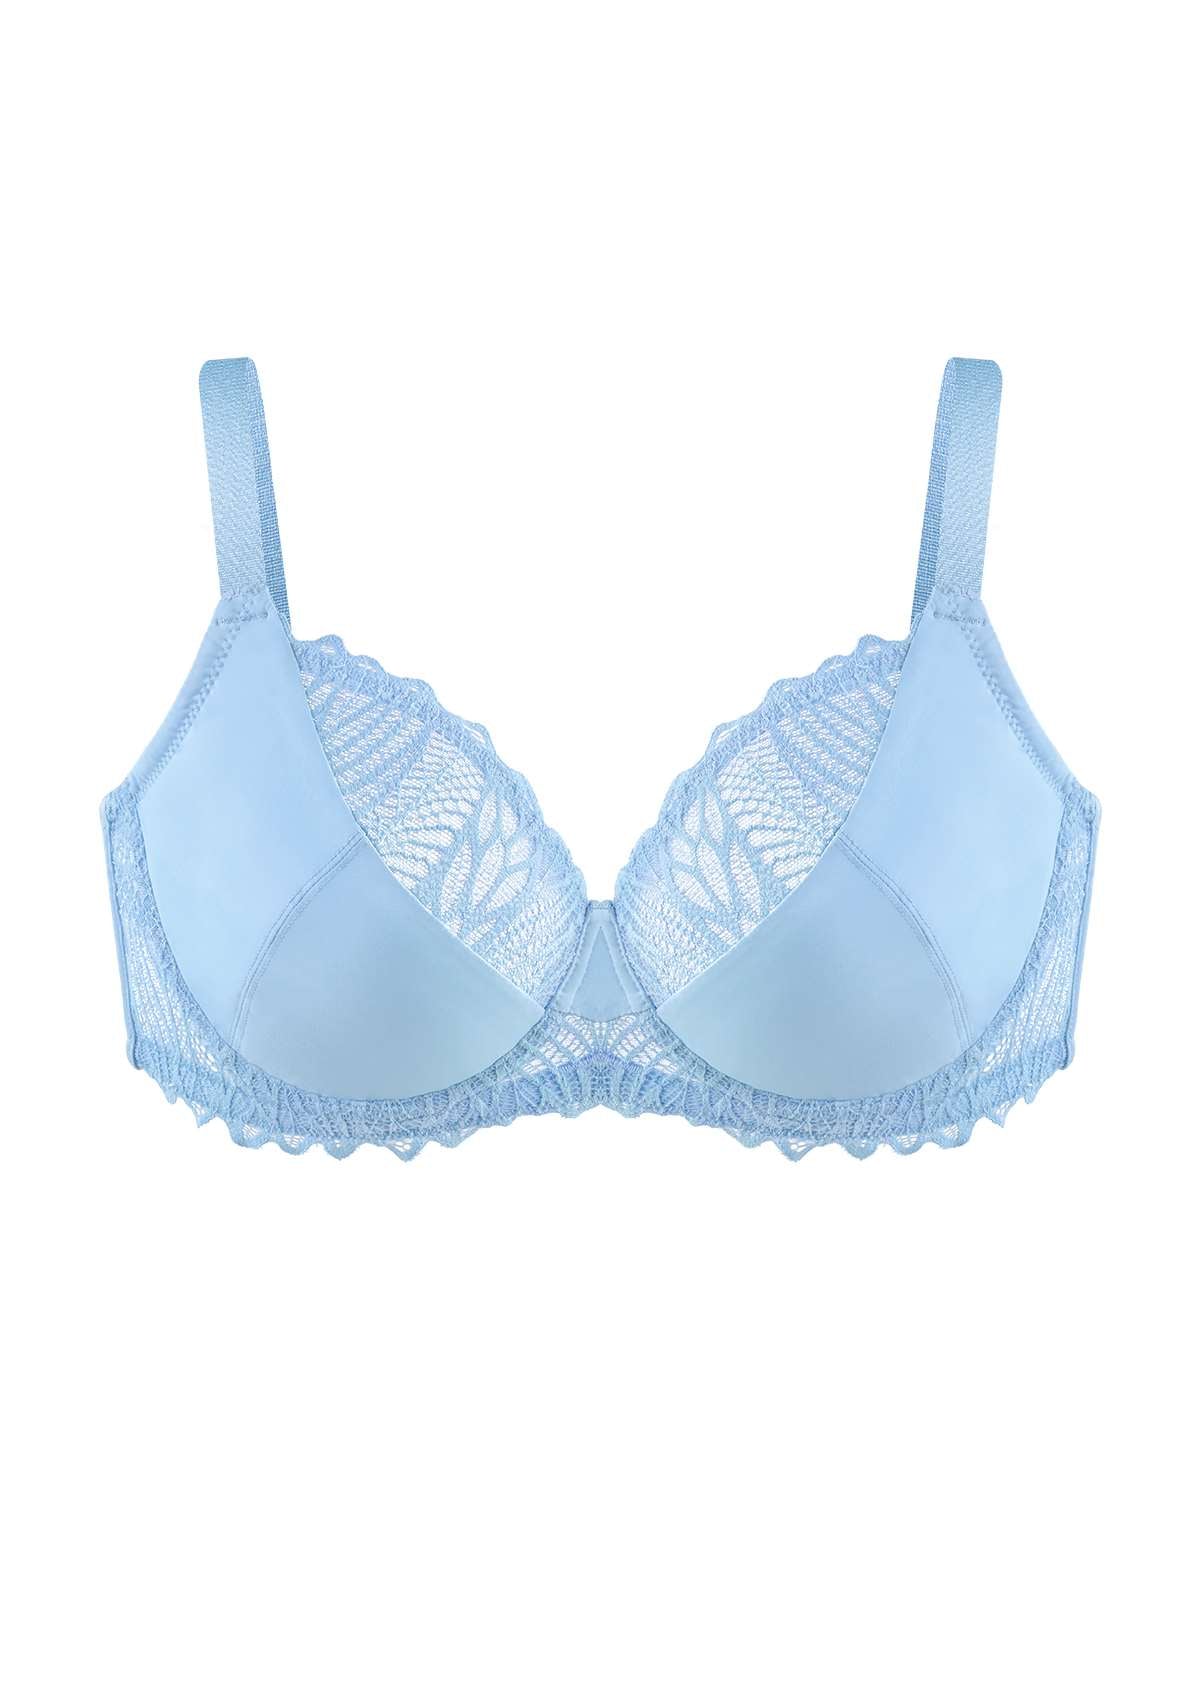 HSIA Pretty Secrets Lace-Trimmed Full Coverage Underwire Bra For Support - Light Pink / 36 / C